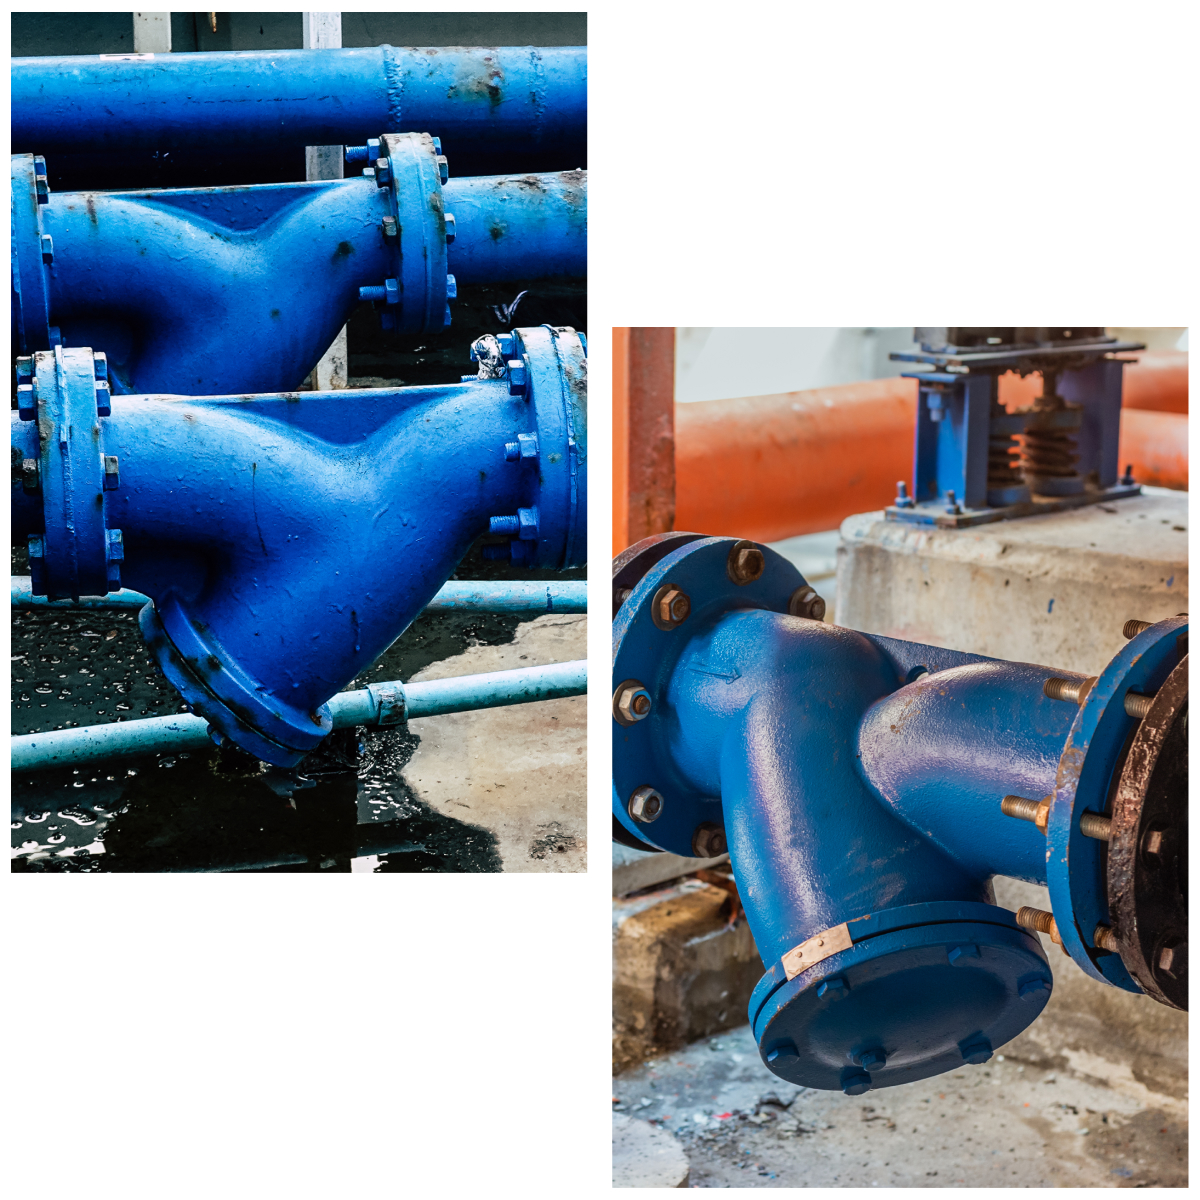 A collage image of industrial Y-stainers from AlterValve.